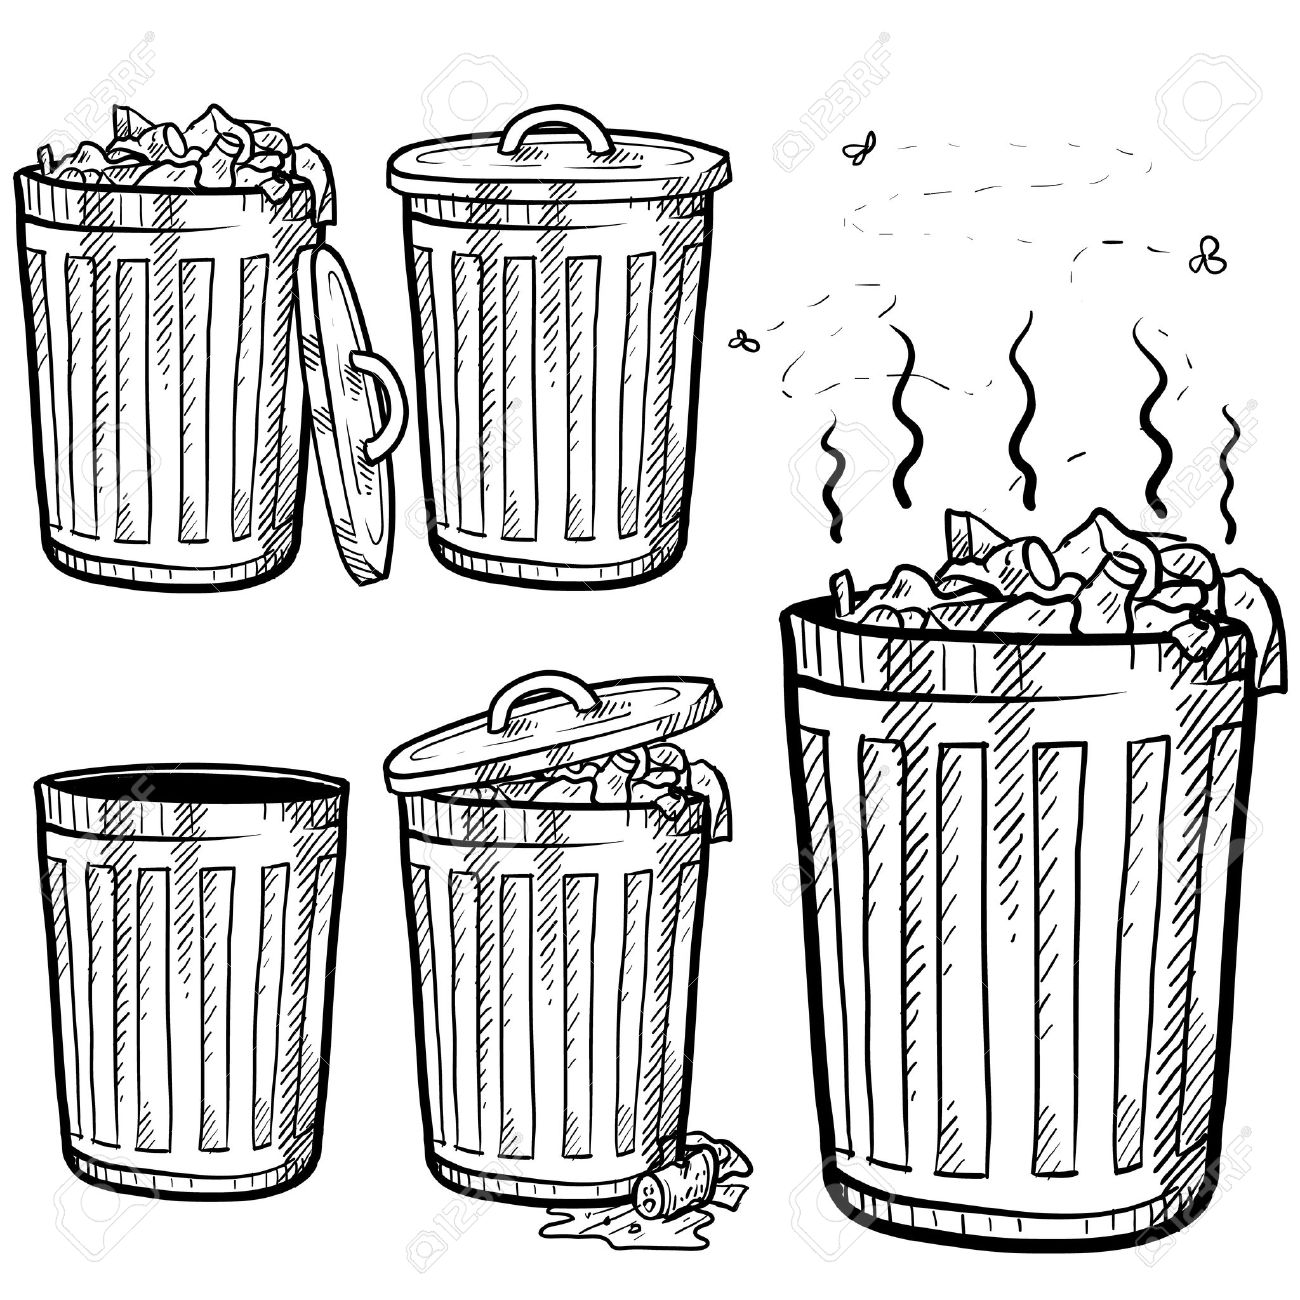 Great How To Draw A Trash Can in the world Check it out now 